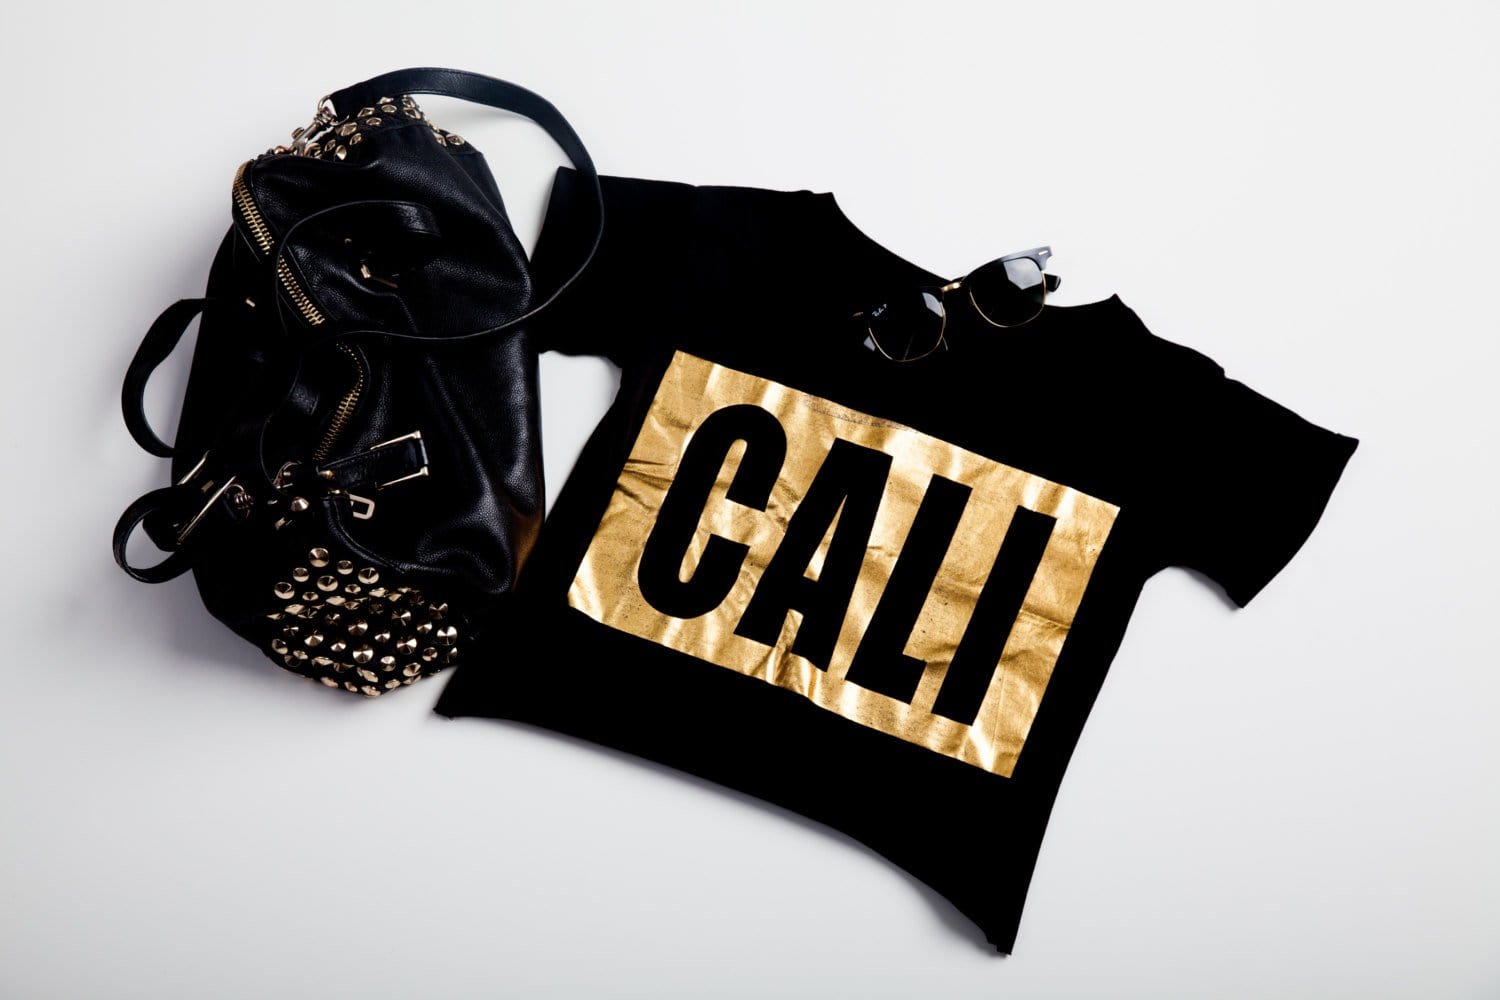 cali gold crop-top tee black tee with gold foil graphic - Cali Diamond